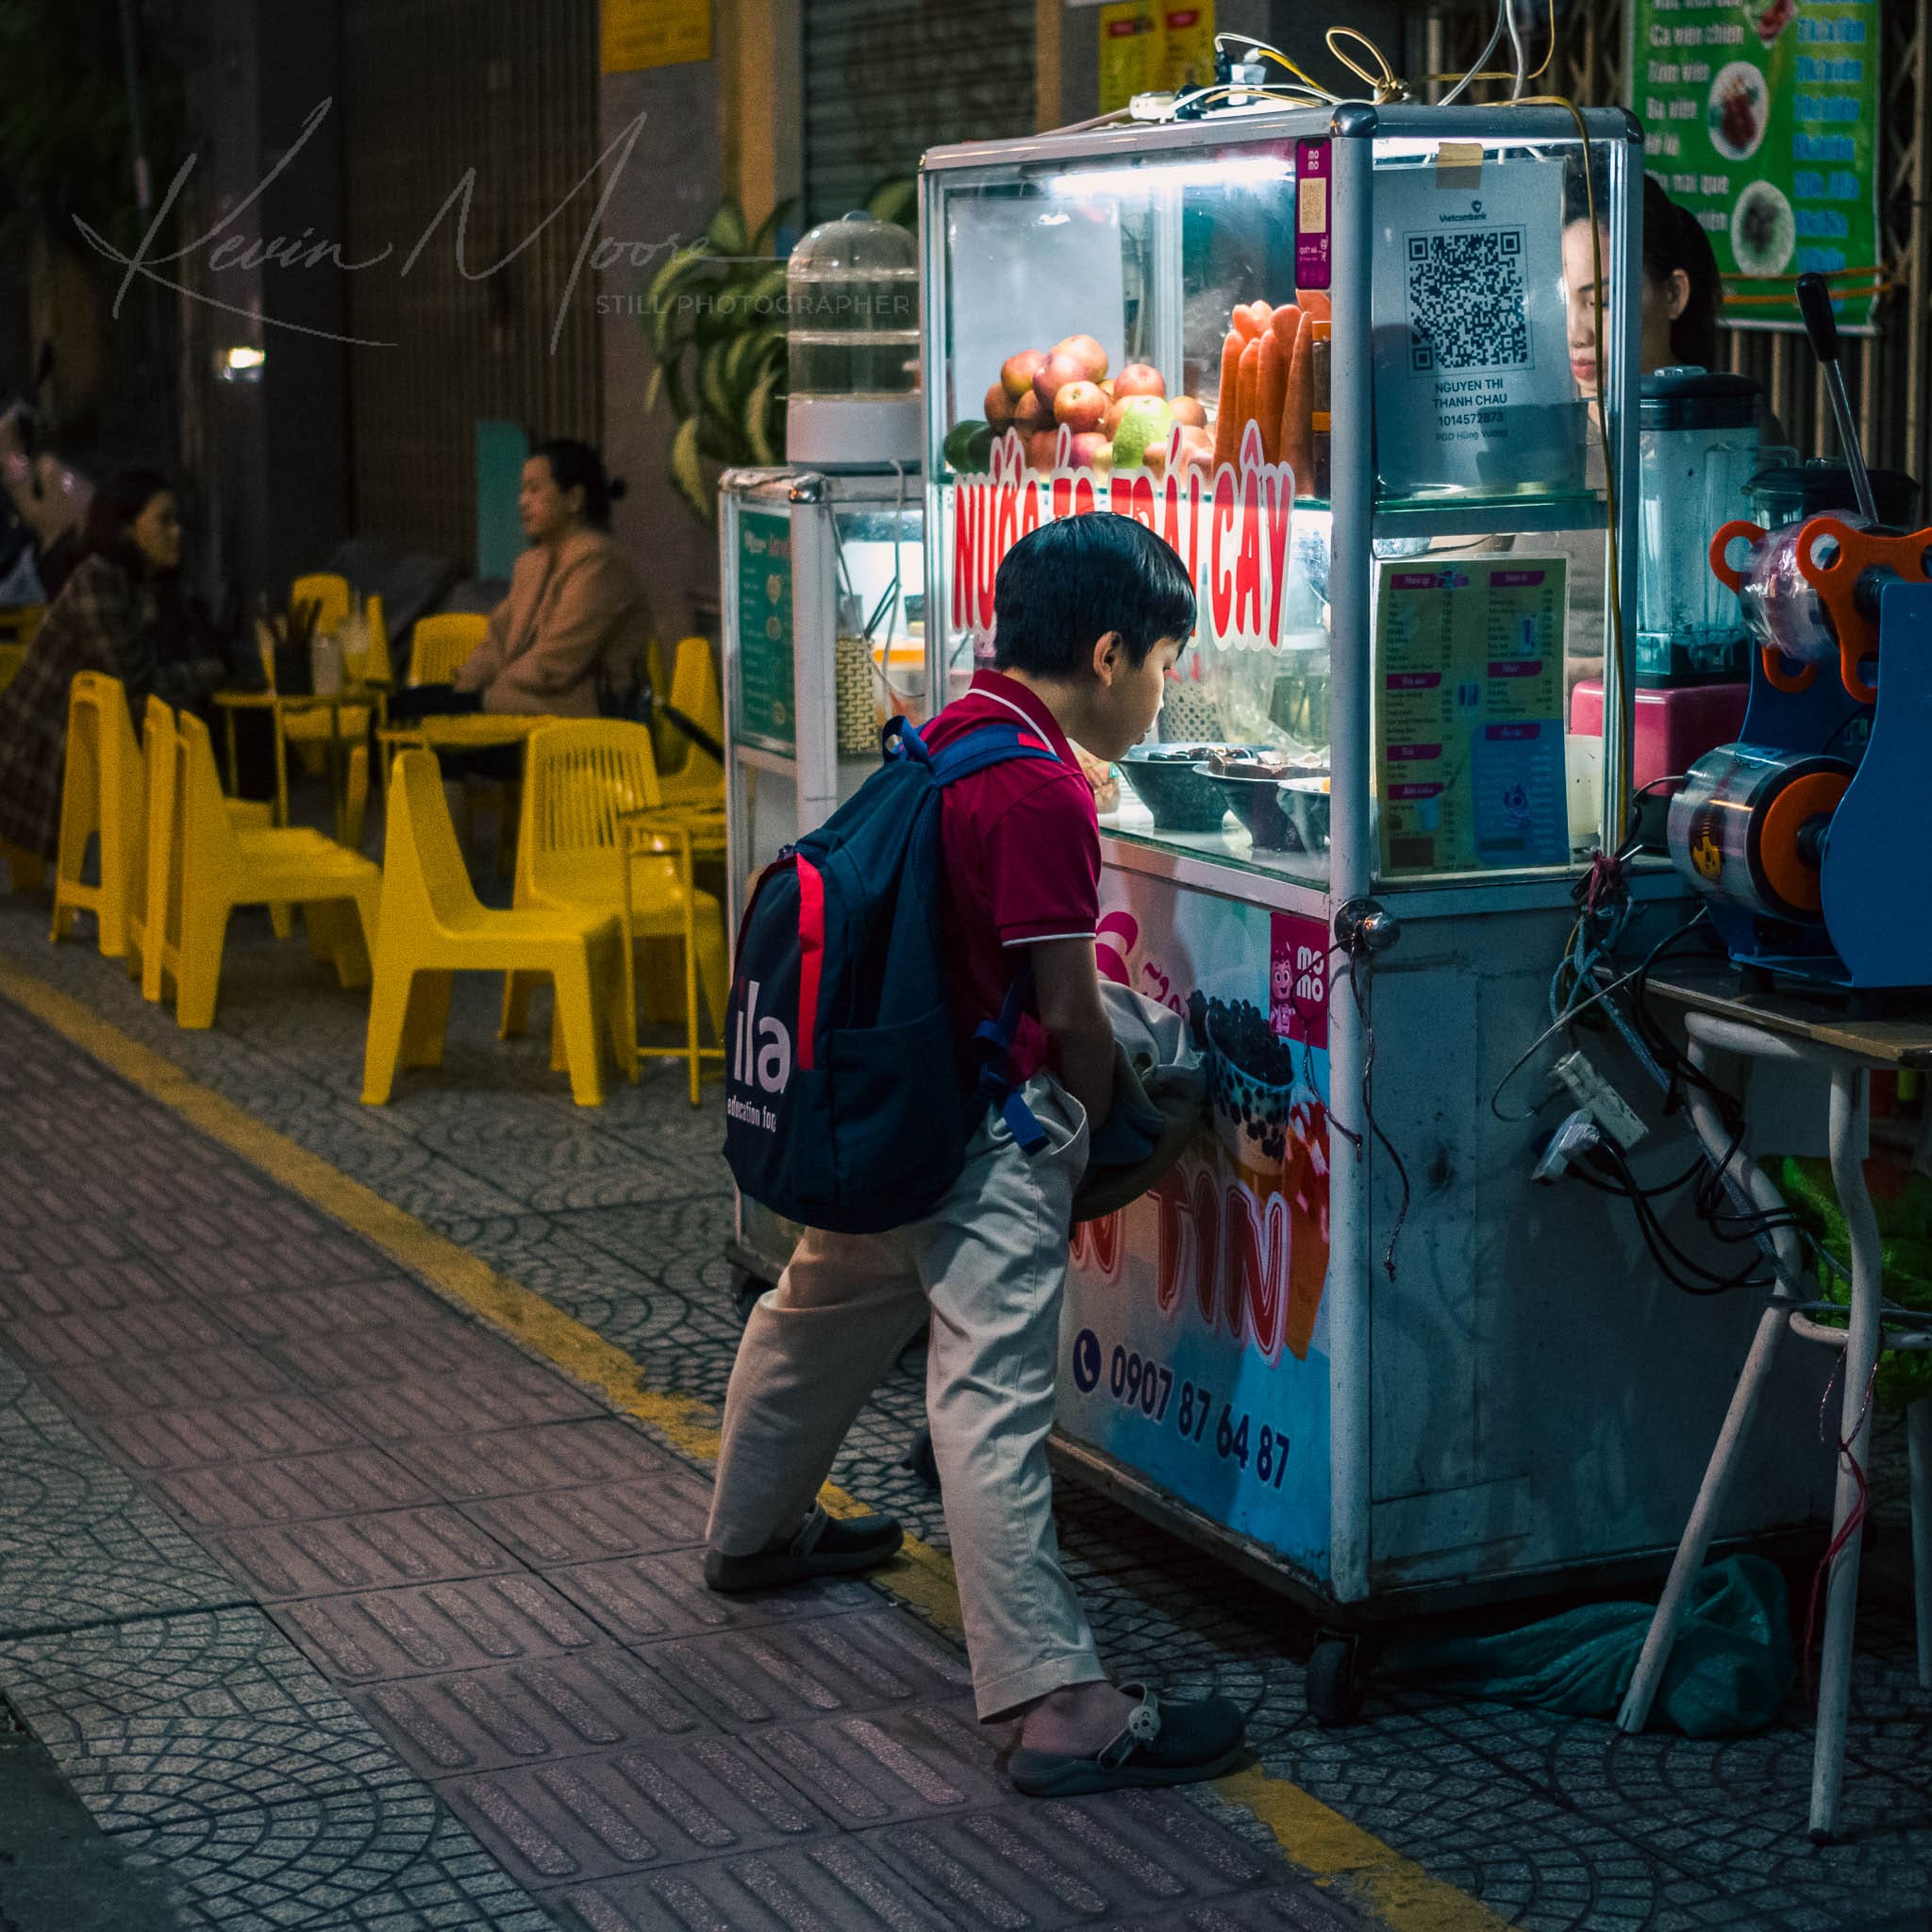 Child ordering street food from a brightly lit vendor cart at night in urban setting.